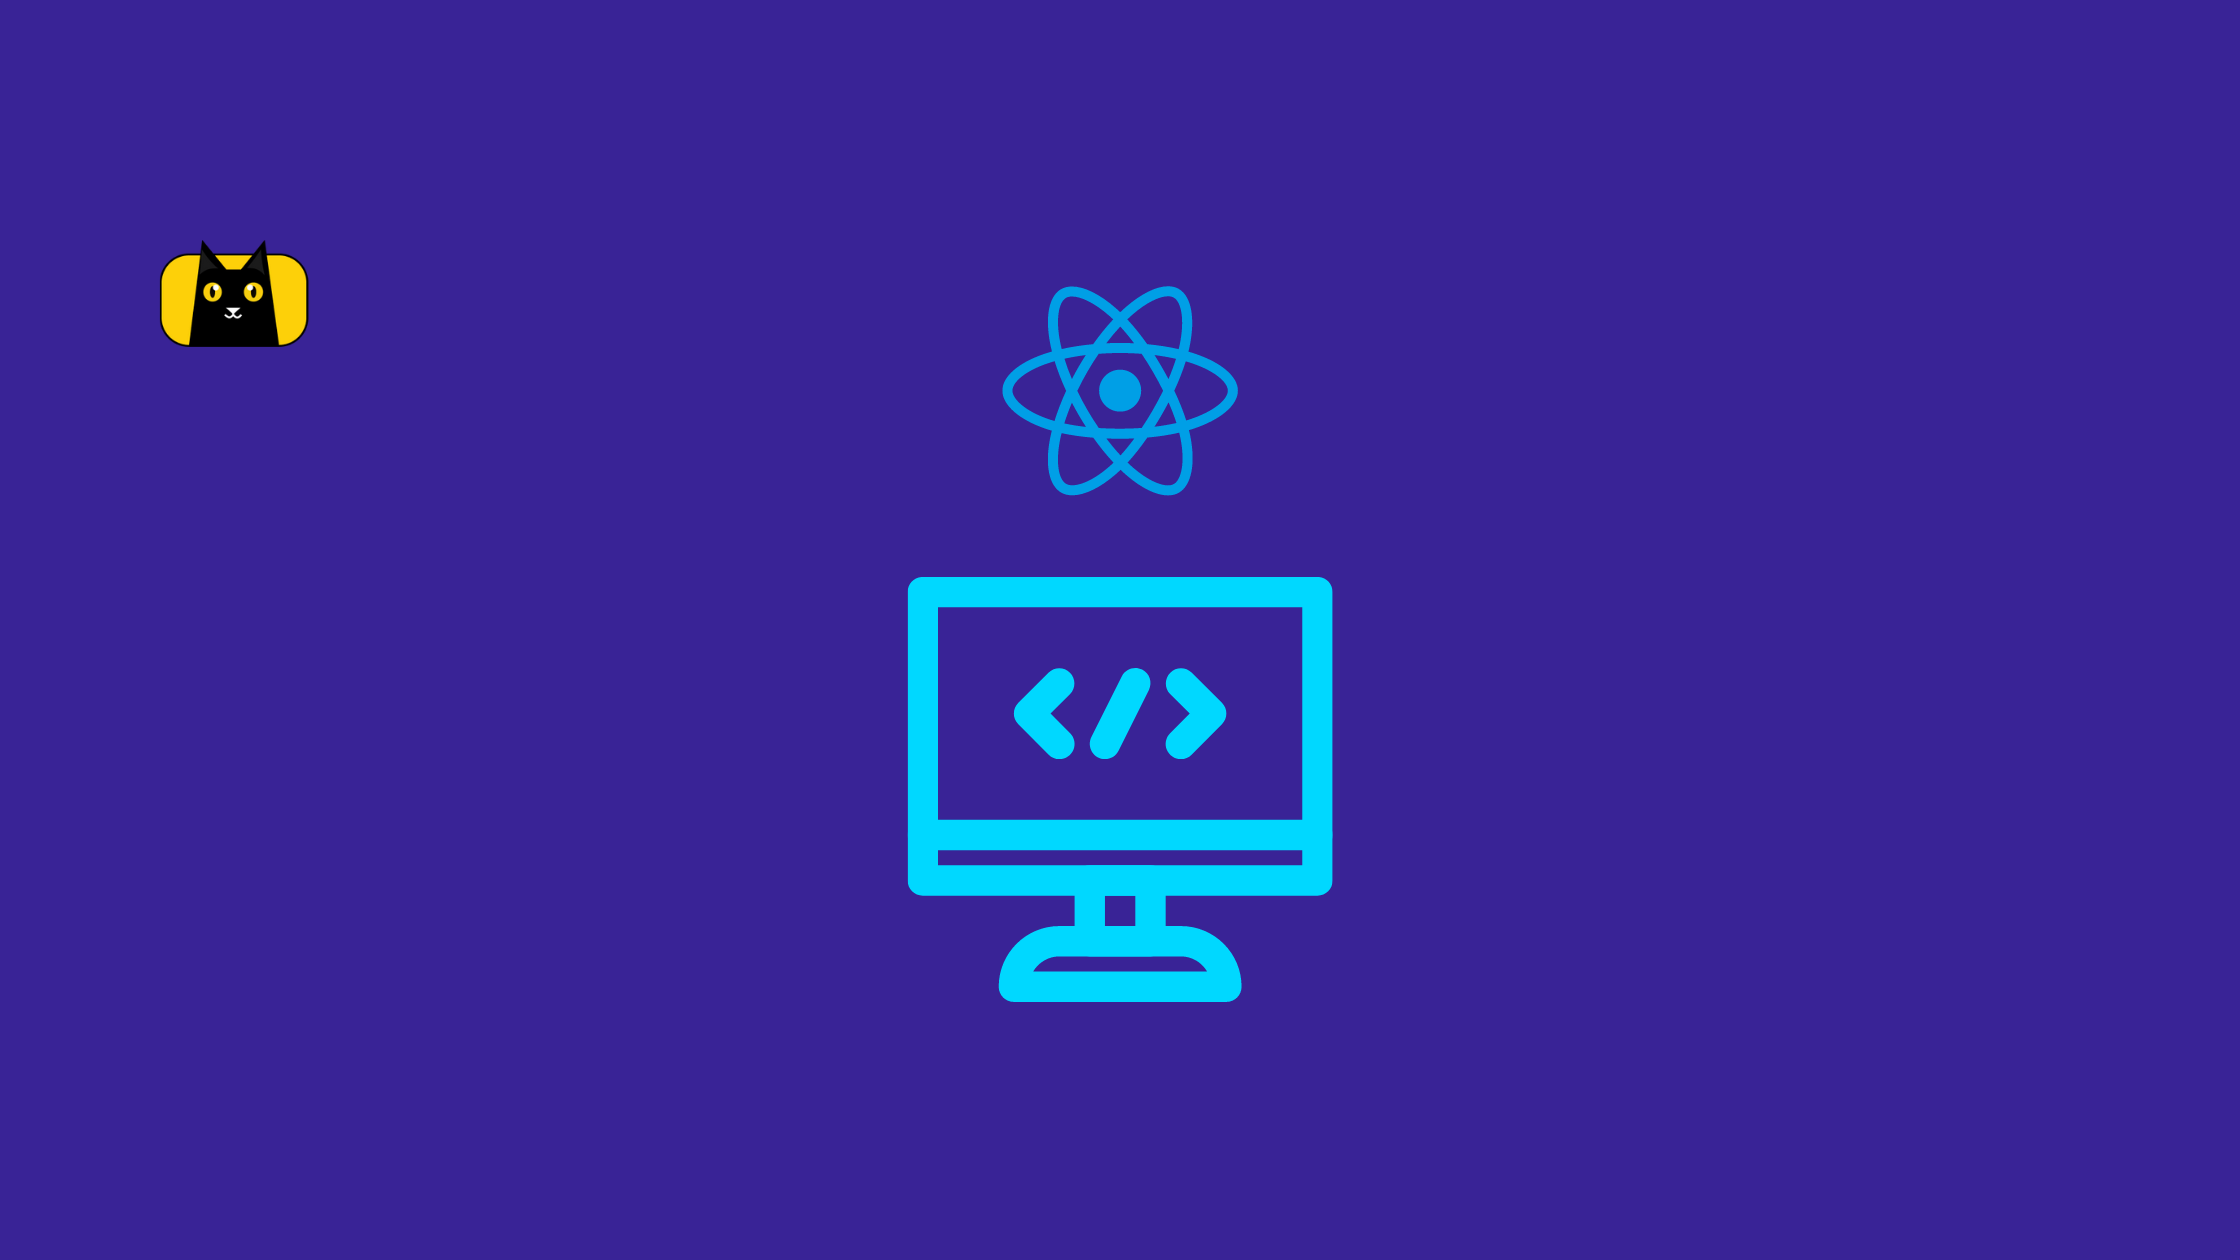 A picture of a computer screen, a React logo, and a CopyCat logo.